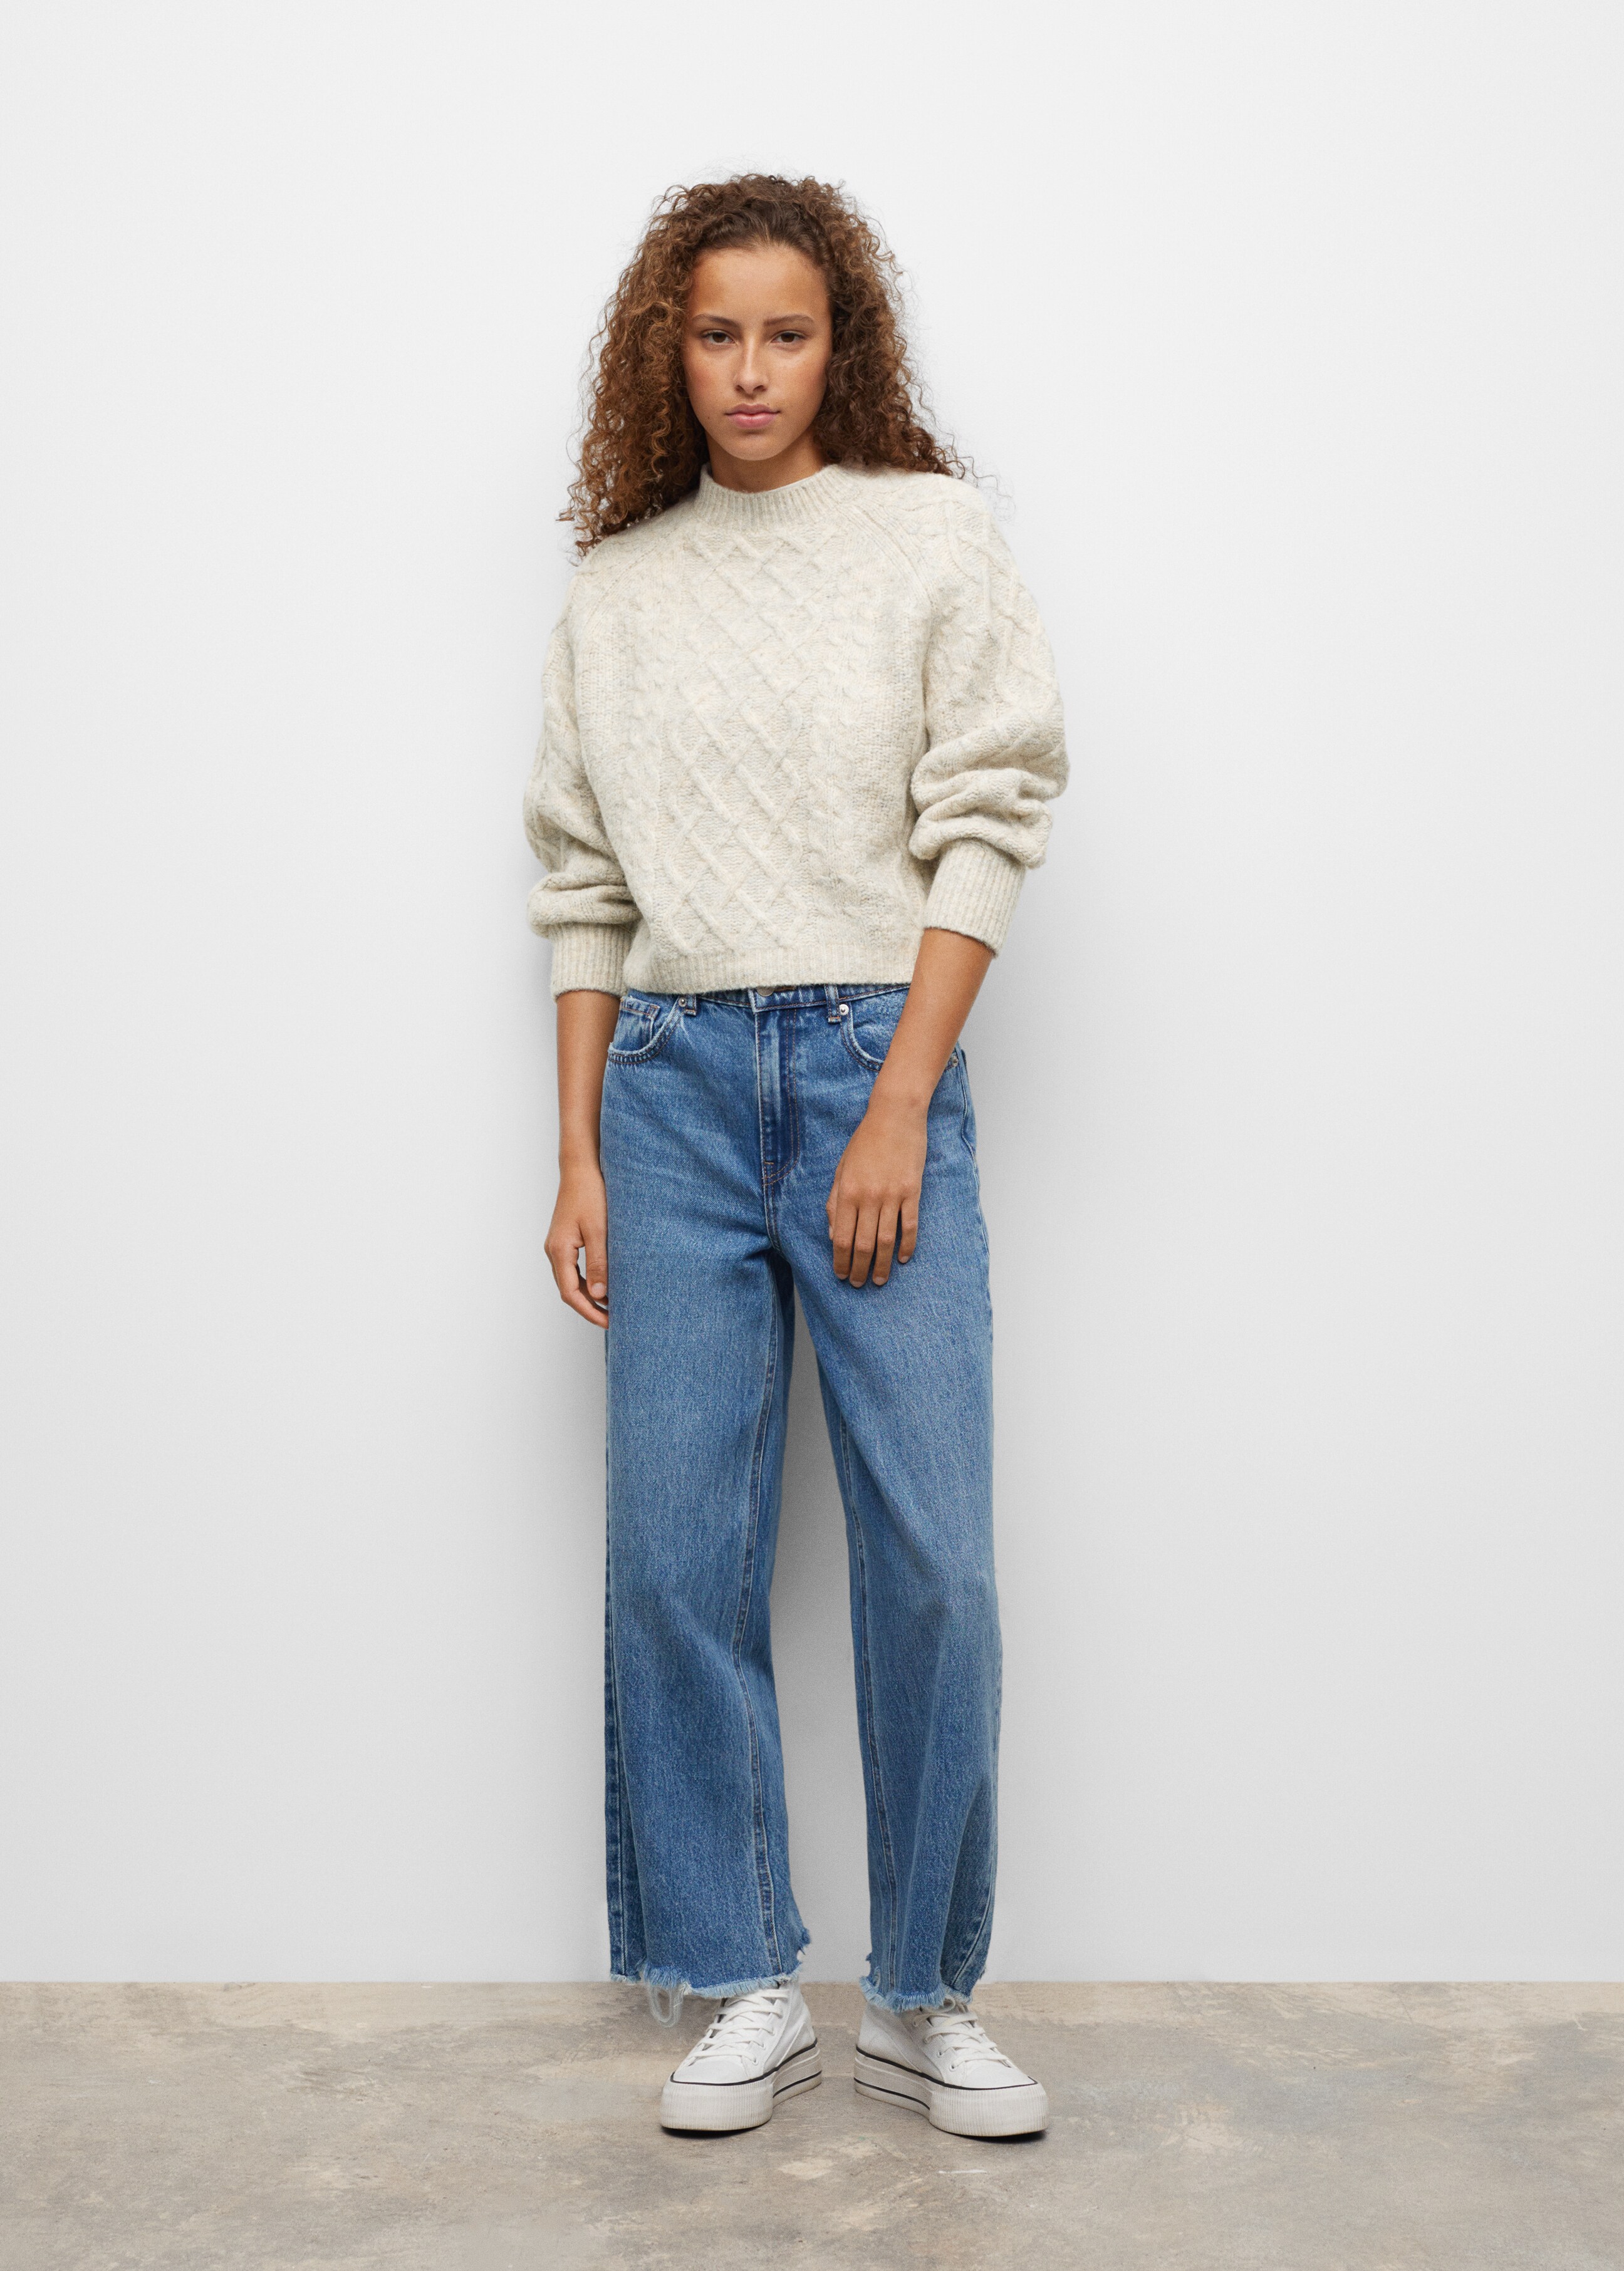 Cable-knit sweater - General plane